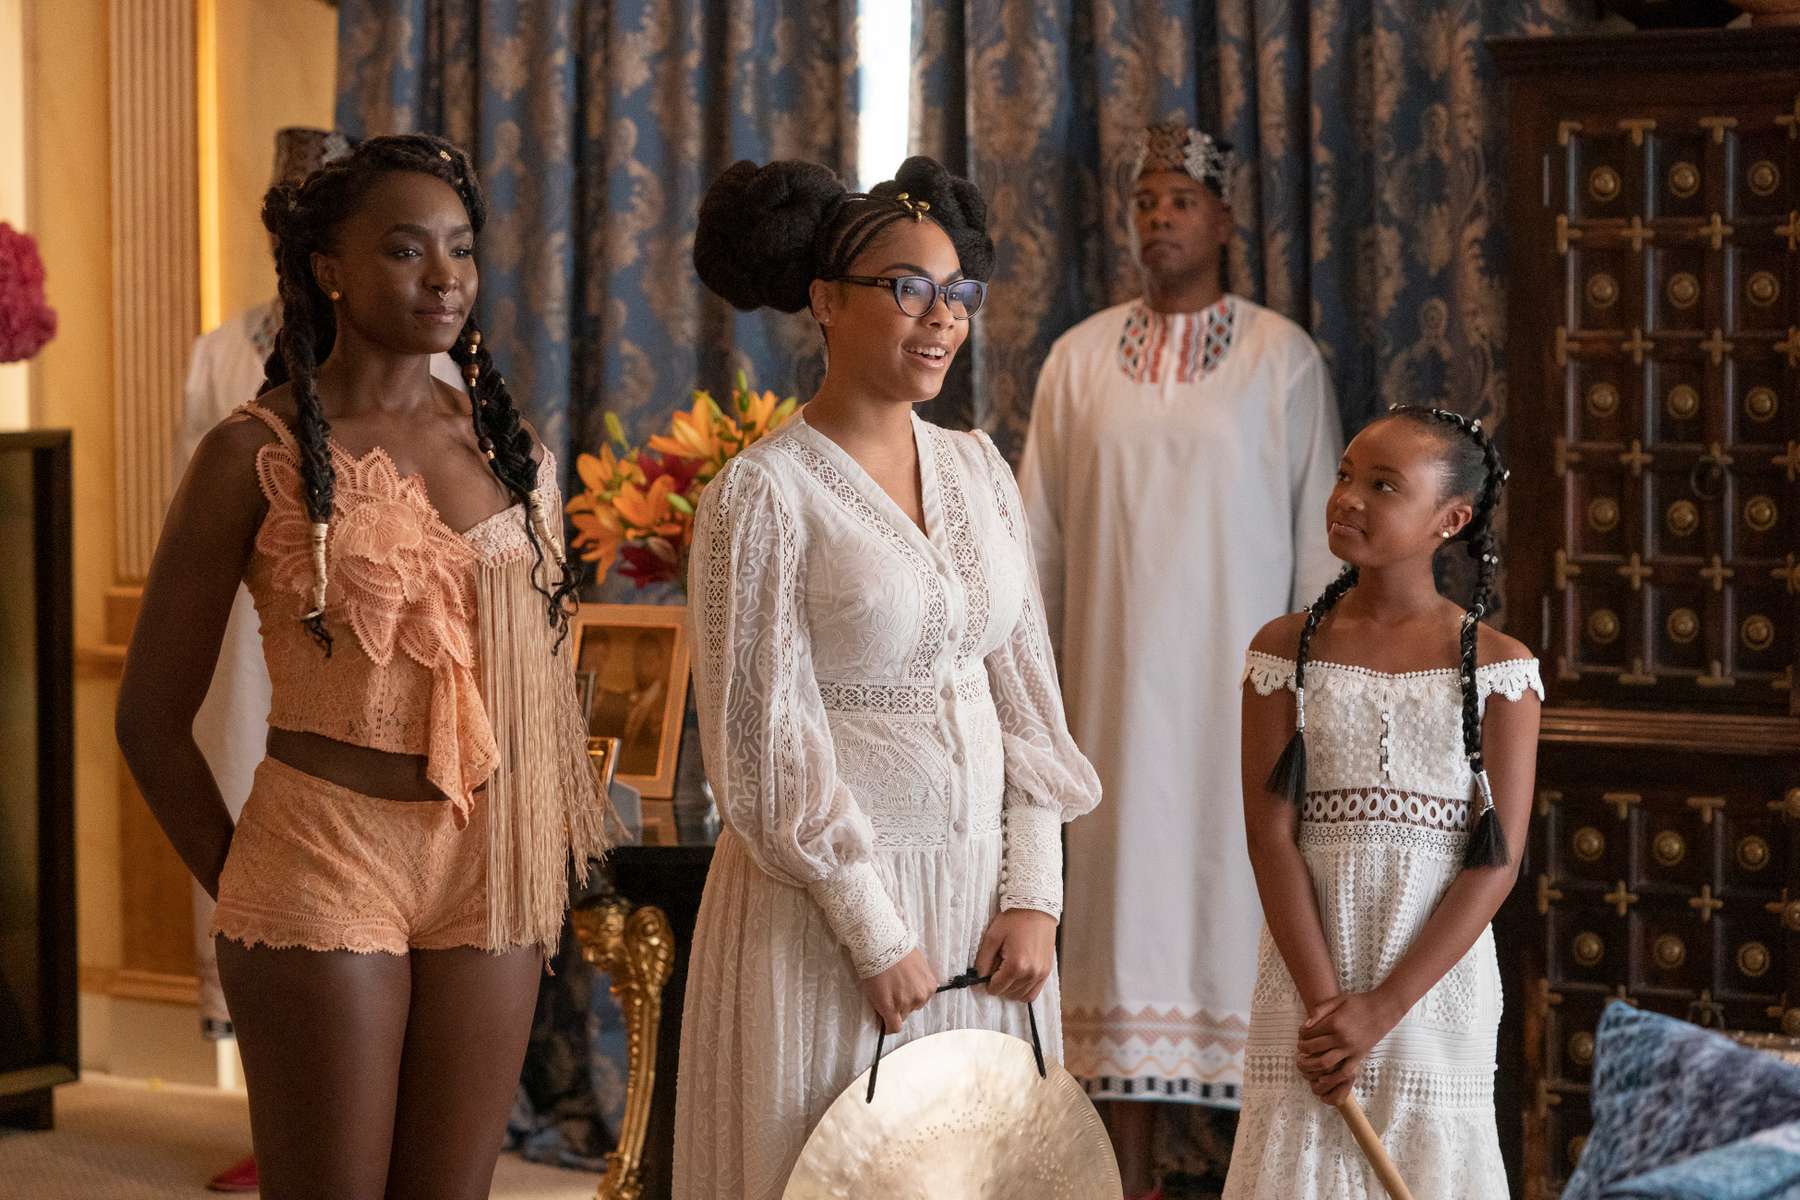 KiKi Layne, Bella Murphy and Akiley Love star in COMING 2 AMERICA Photo: Quantrell D. Colbert© 2020 Paramount Pictures